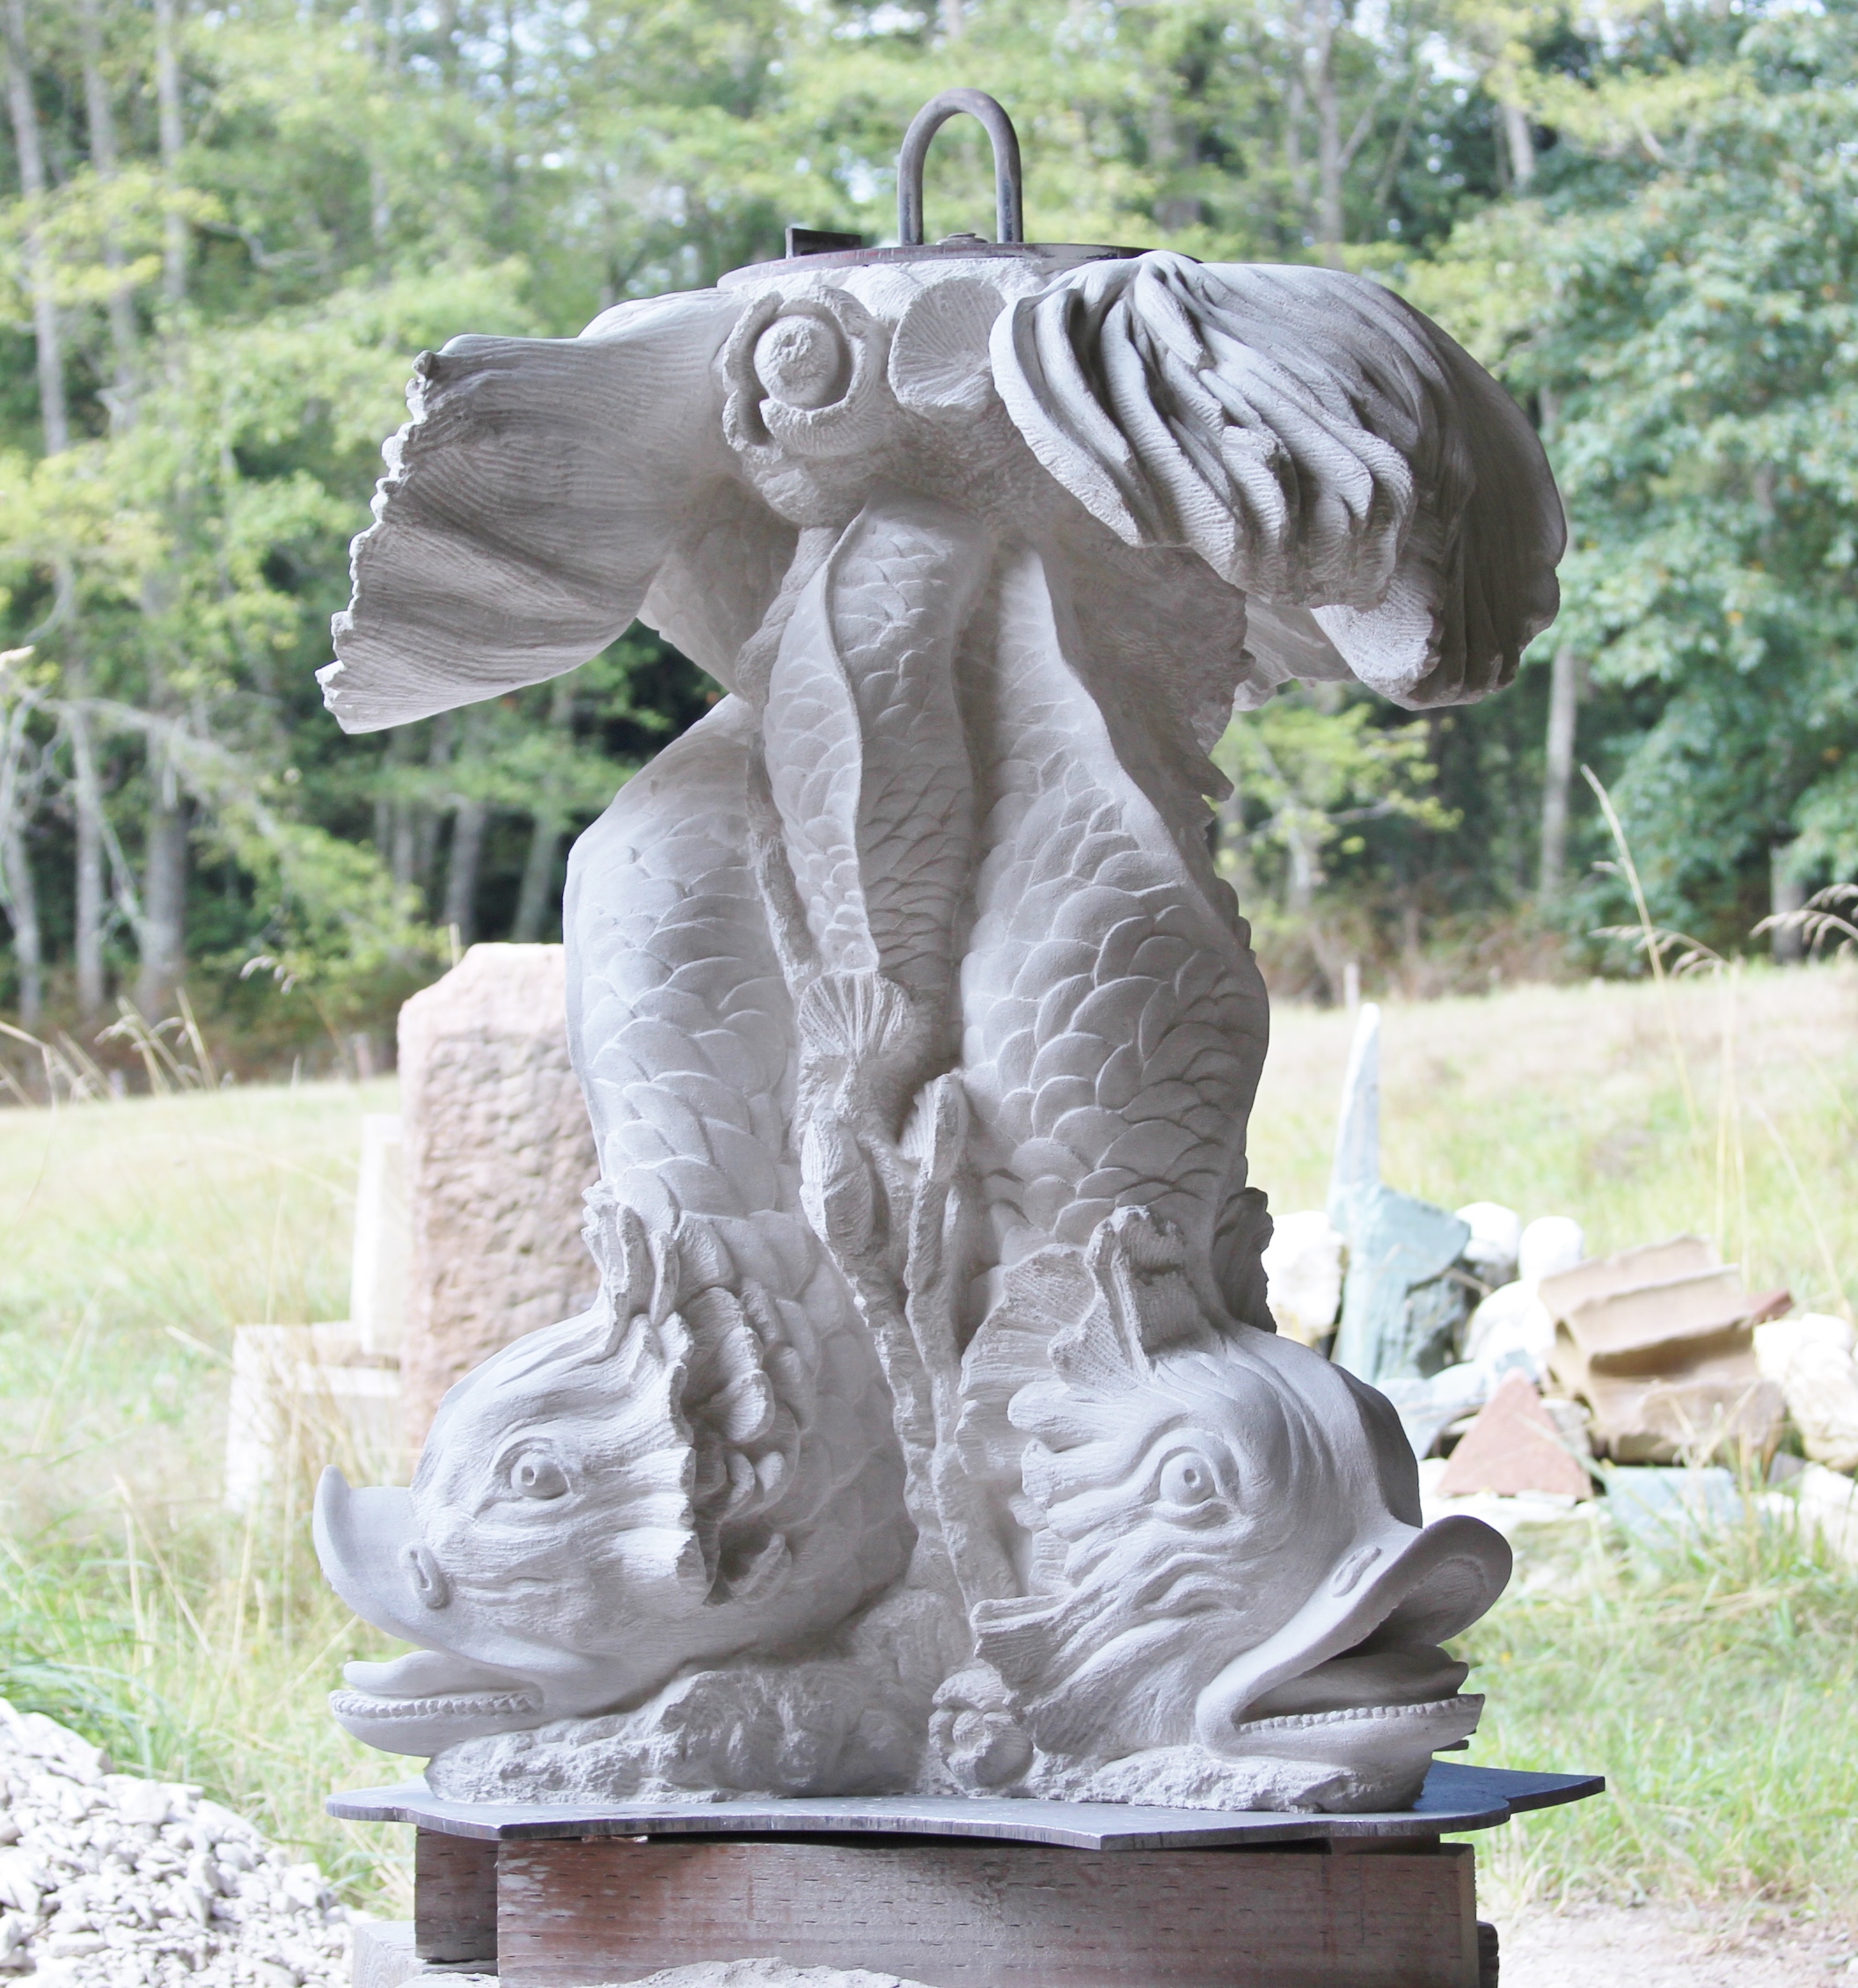 Indiana Limestone Fish Fountain, 2015. My commission entailed enlarging an existing 19th century English fountain. The original was a 14" high plaster cast. My version is 36" high and was drilled through the center to accommodate plumbing to an upper basin, as well as three mouth spouts. The entire fountain is 6’ high and is in a Napa Valley, California private estate.